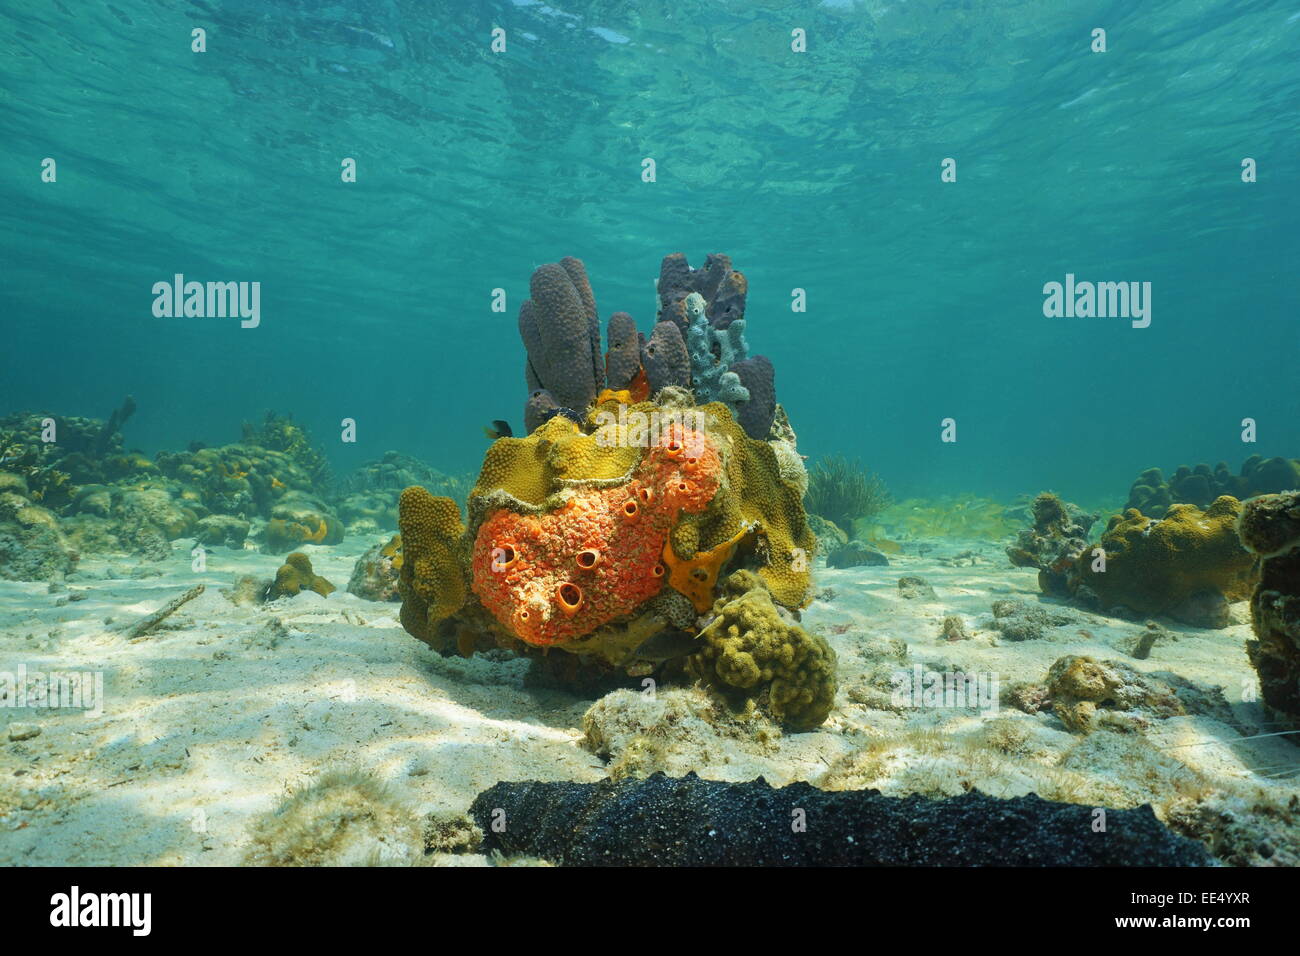 Colorful life under sea with sponges and corals, Caribbean Stock Photo